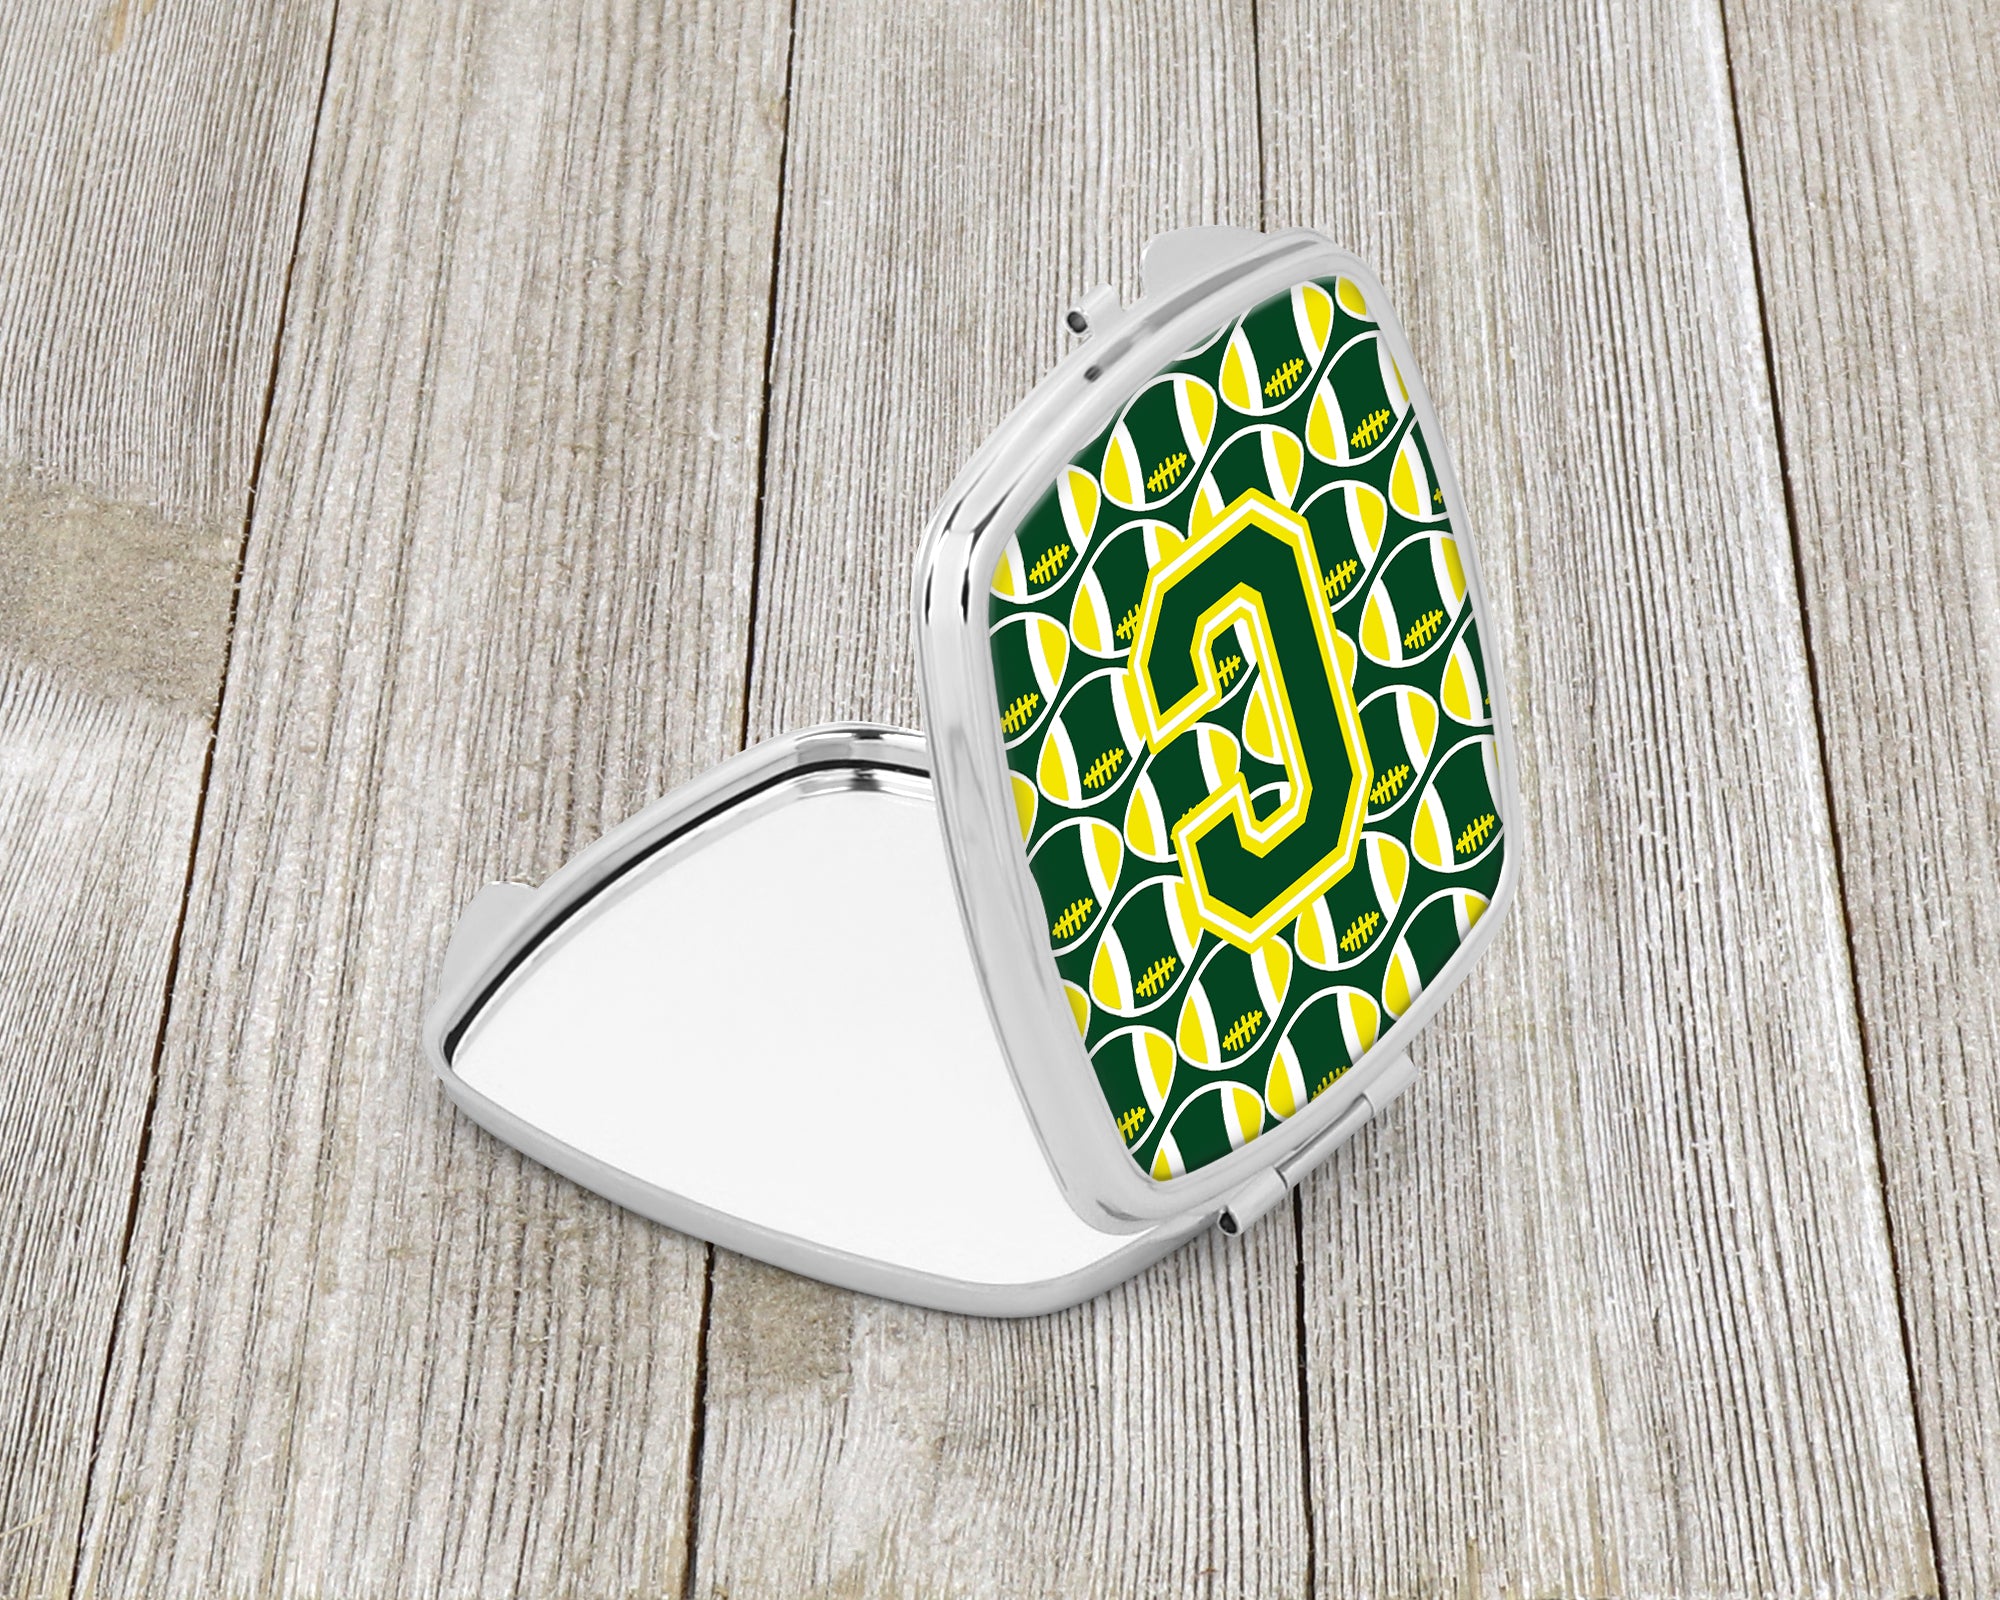 Letter C Football Green and Yellow Compact Mirror CJ1075-CSCM  the-store.com.